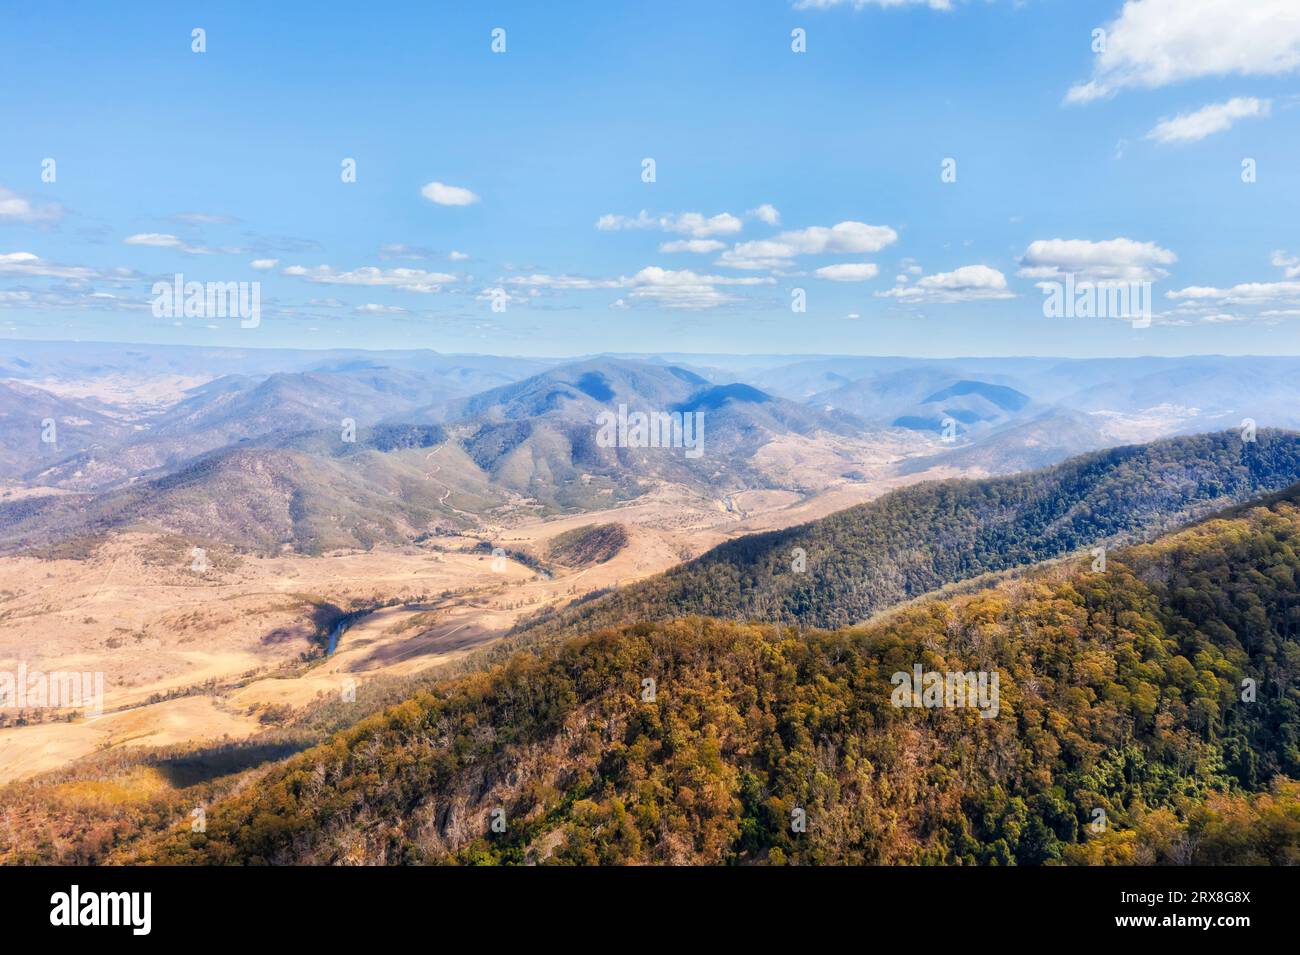 Aerial landscape view of scenic mountain vale and ranges of Great Dividing range in Australia at Nowendoc. Stock Photo